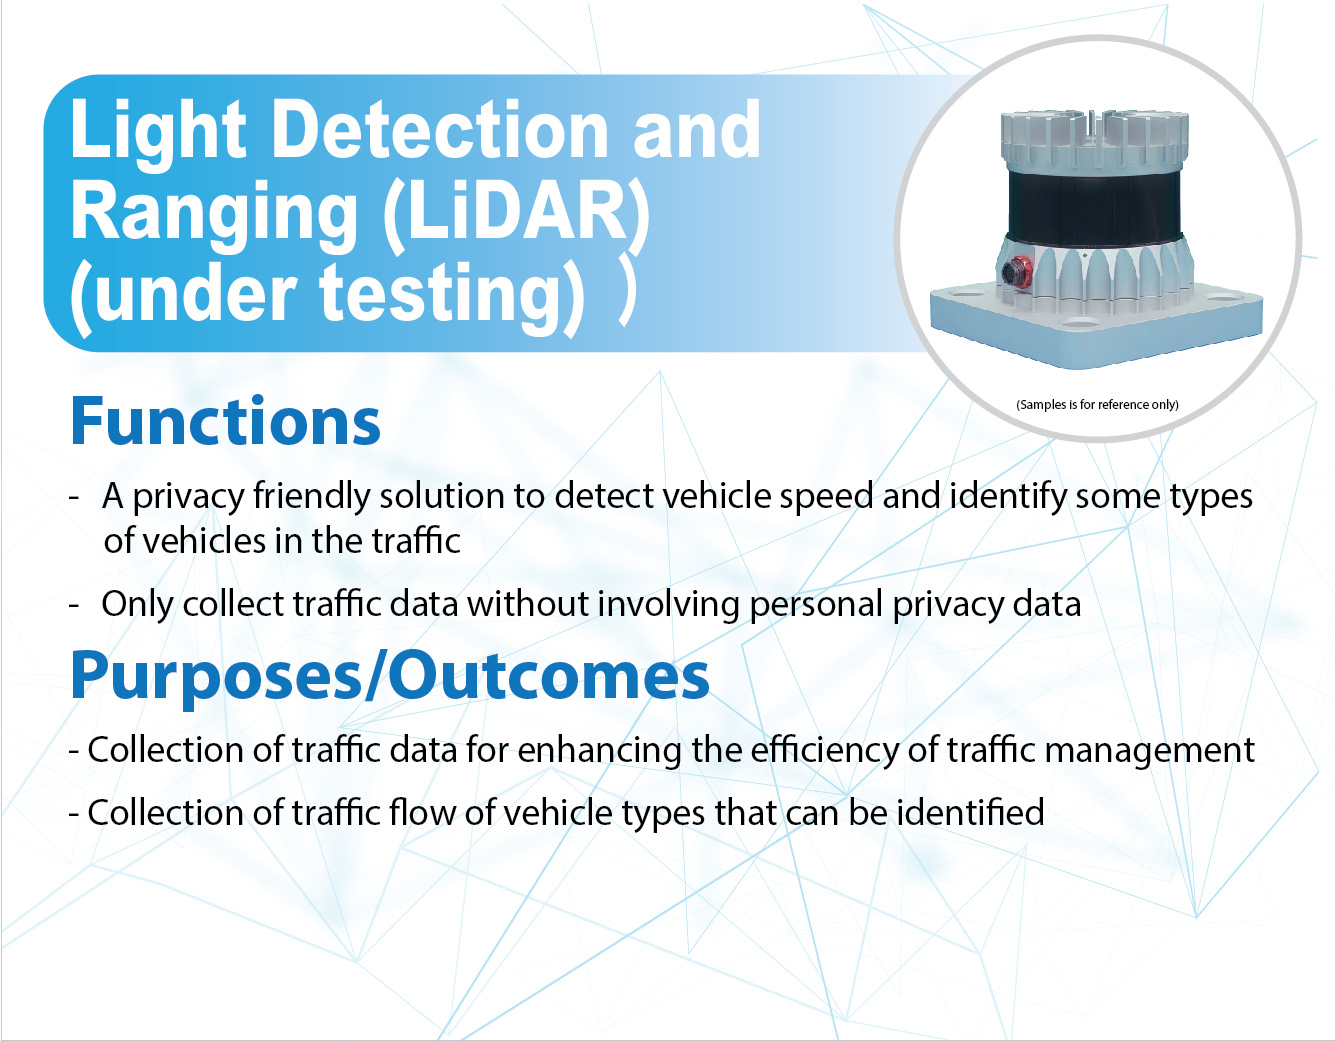 Light Detection and Ranging (LiDAR) (under testing),
					Functions -
					A privacy friendly solution to detect vehicle speed and identify some types of vehicles in the traffic.
					Only collect traffic data without involving personal privacy data.
					
					Purposes/Outcomes -
					Collection of traffic data for enhancing the efficiency of traffic management.
					Collection of traffic flow of vehicle types that can be identified